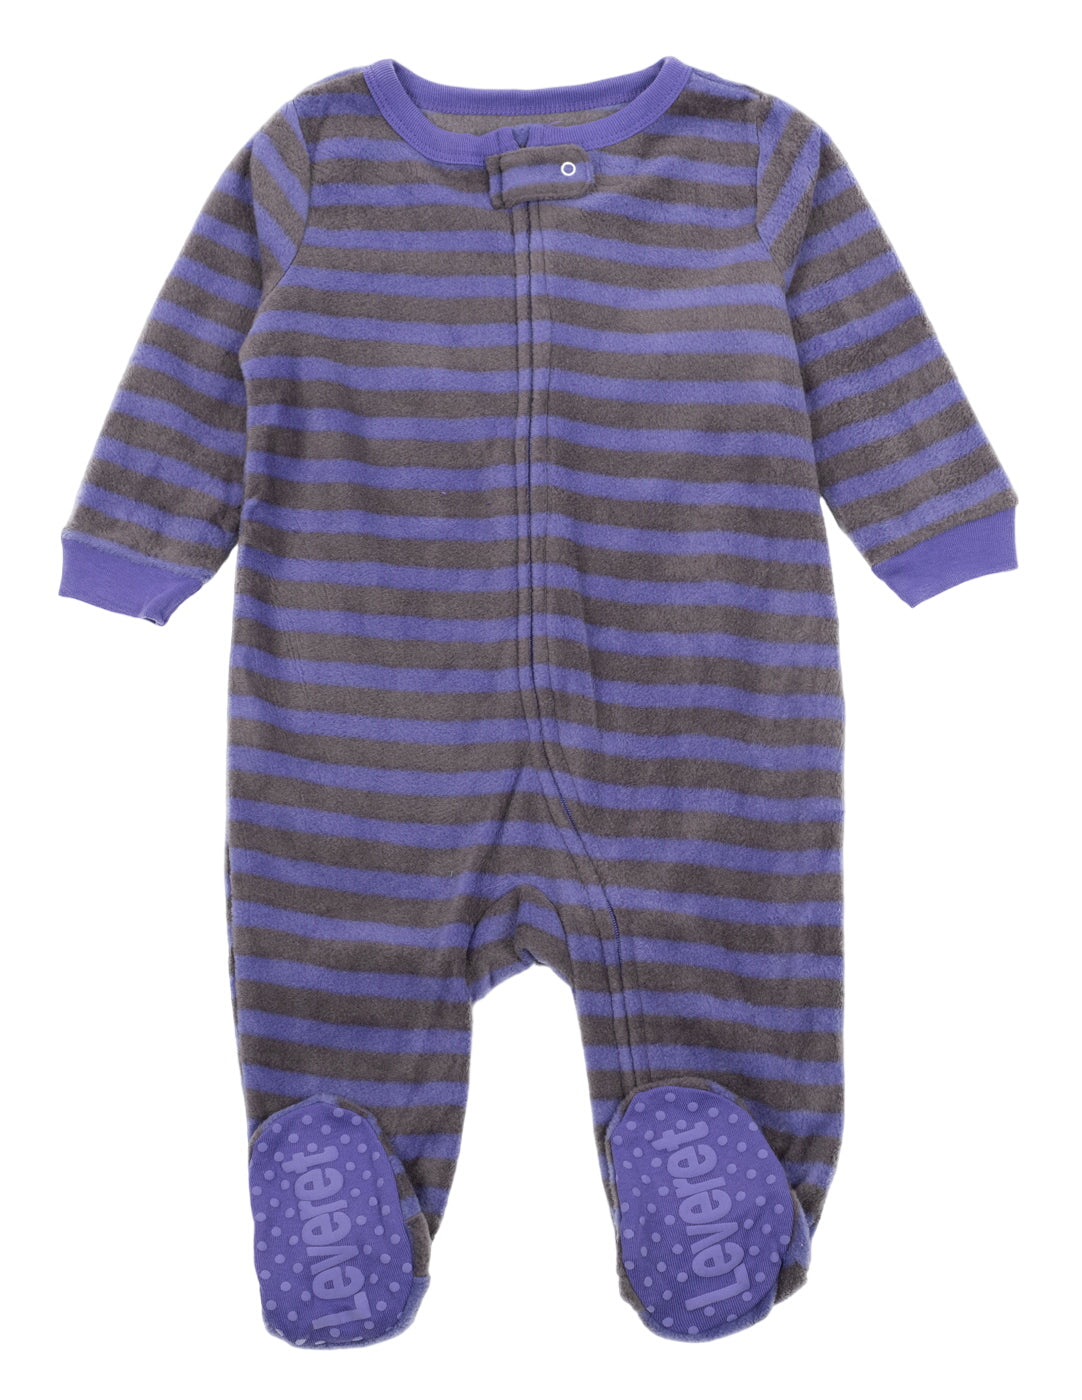 Baby Footed Fleece Striped Pajamas